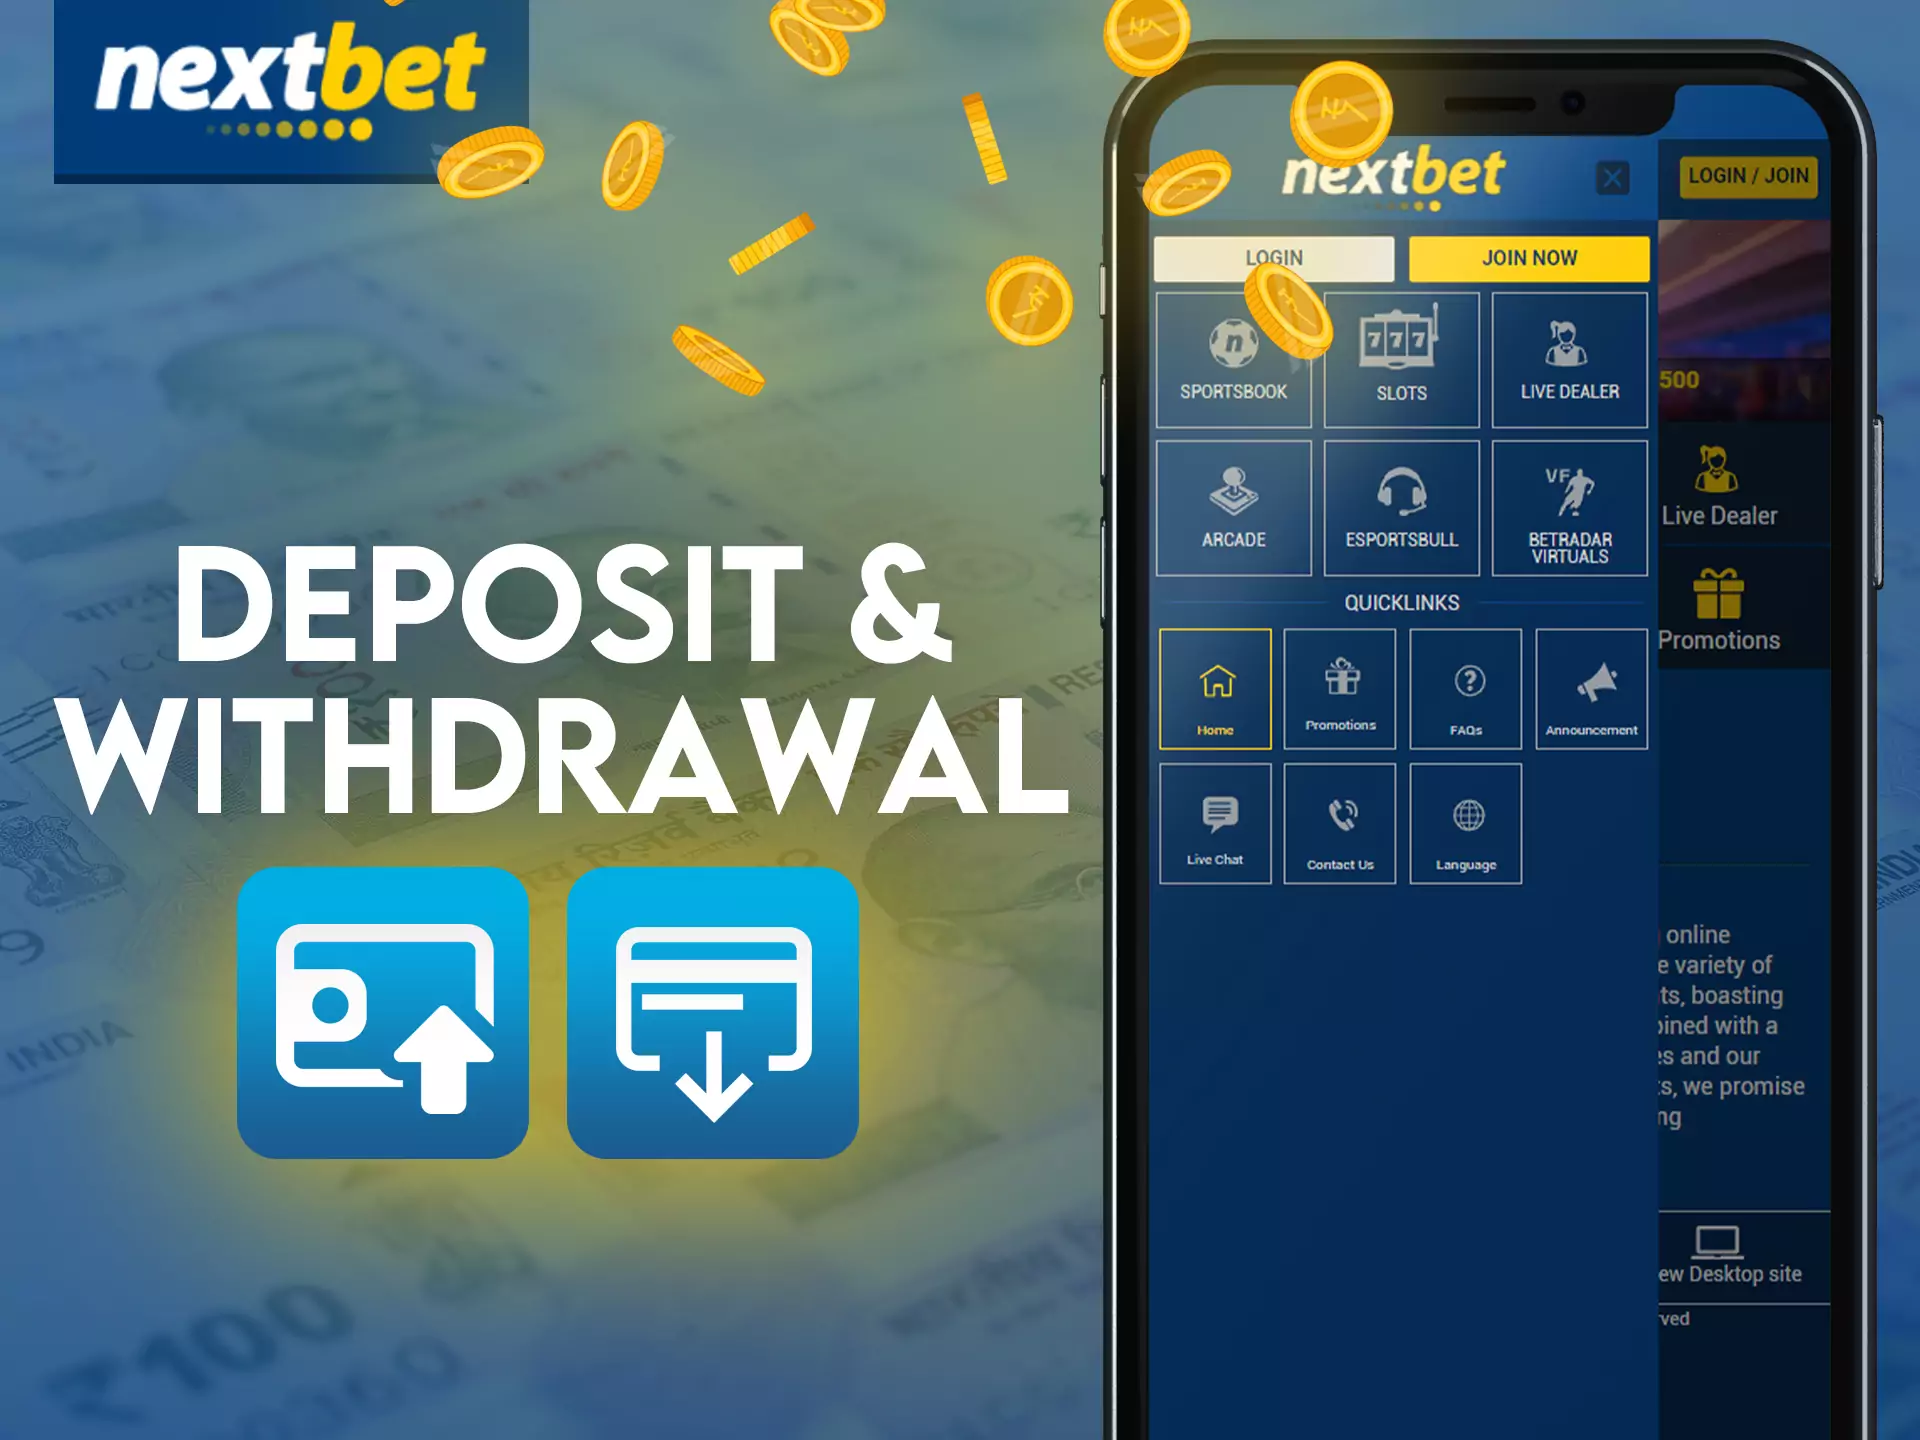 Learn how to deposit and withdraw money from your account in the Nextbet app.